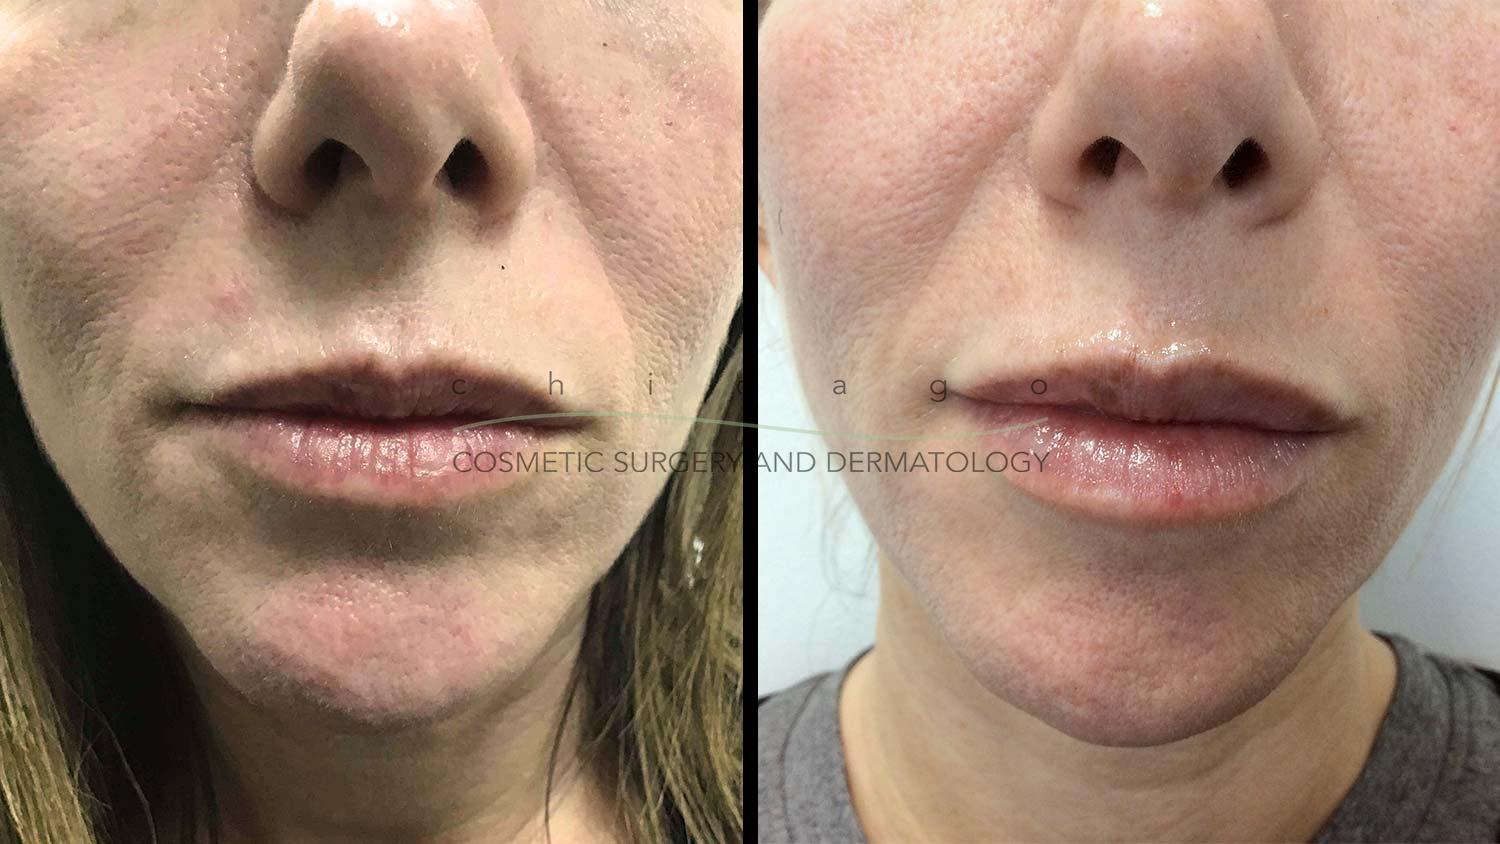 Juvederm Vollure lip filler before and after